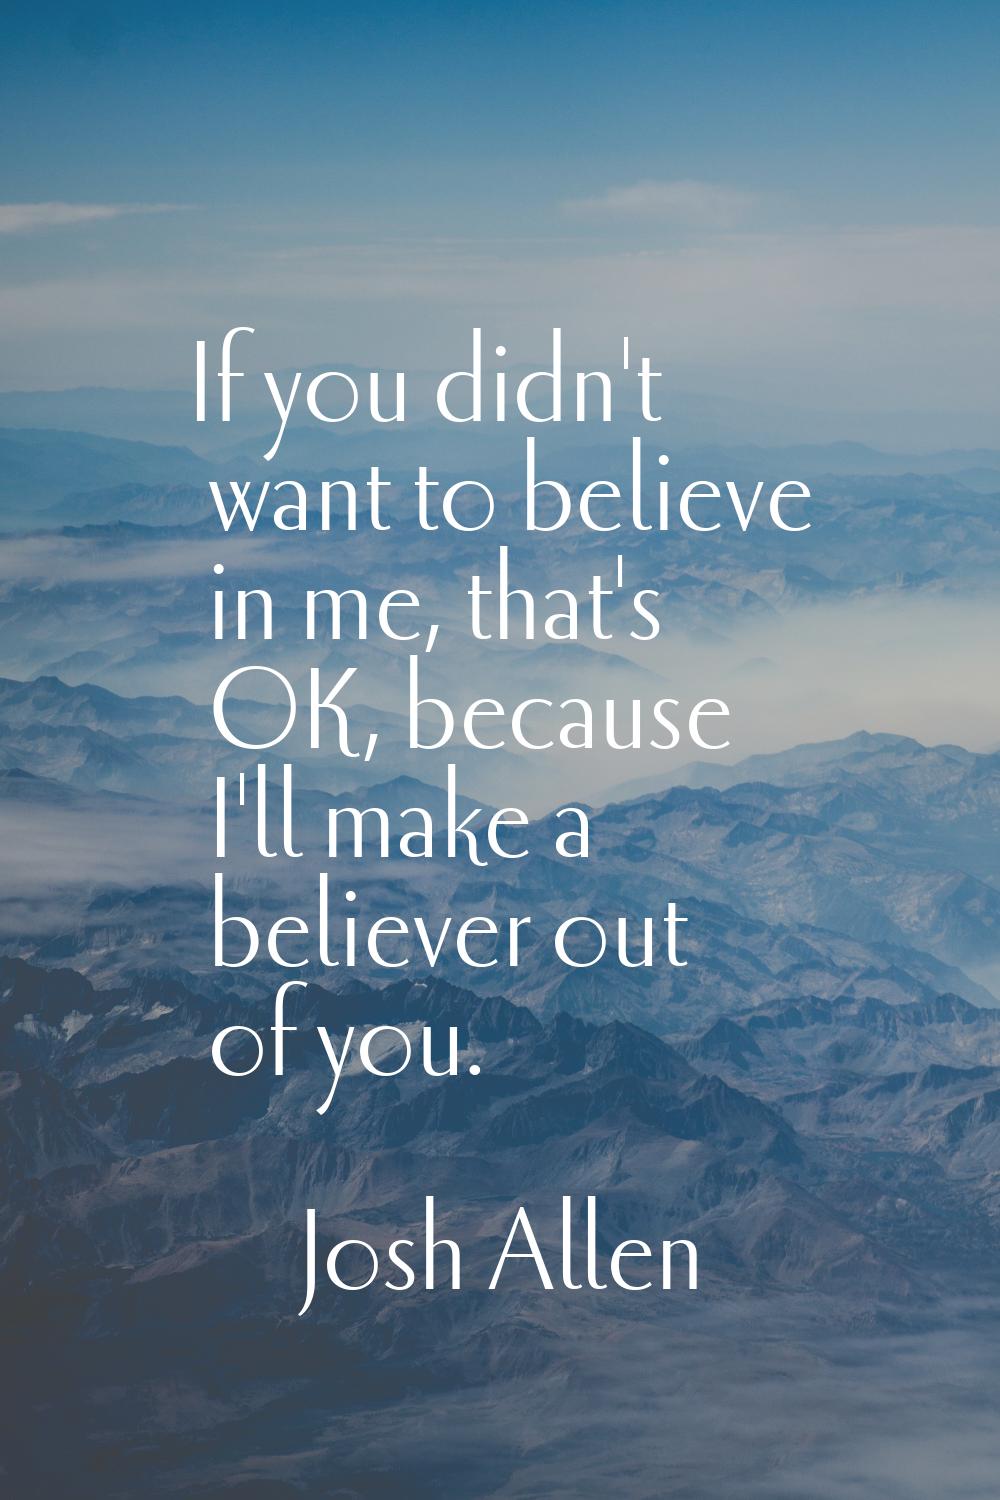 If you didn't want to believe in me, that's OK, because I'll make a believer out of you.